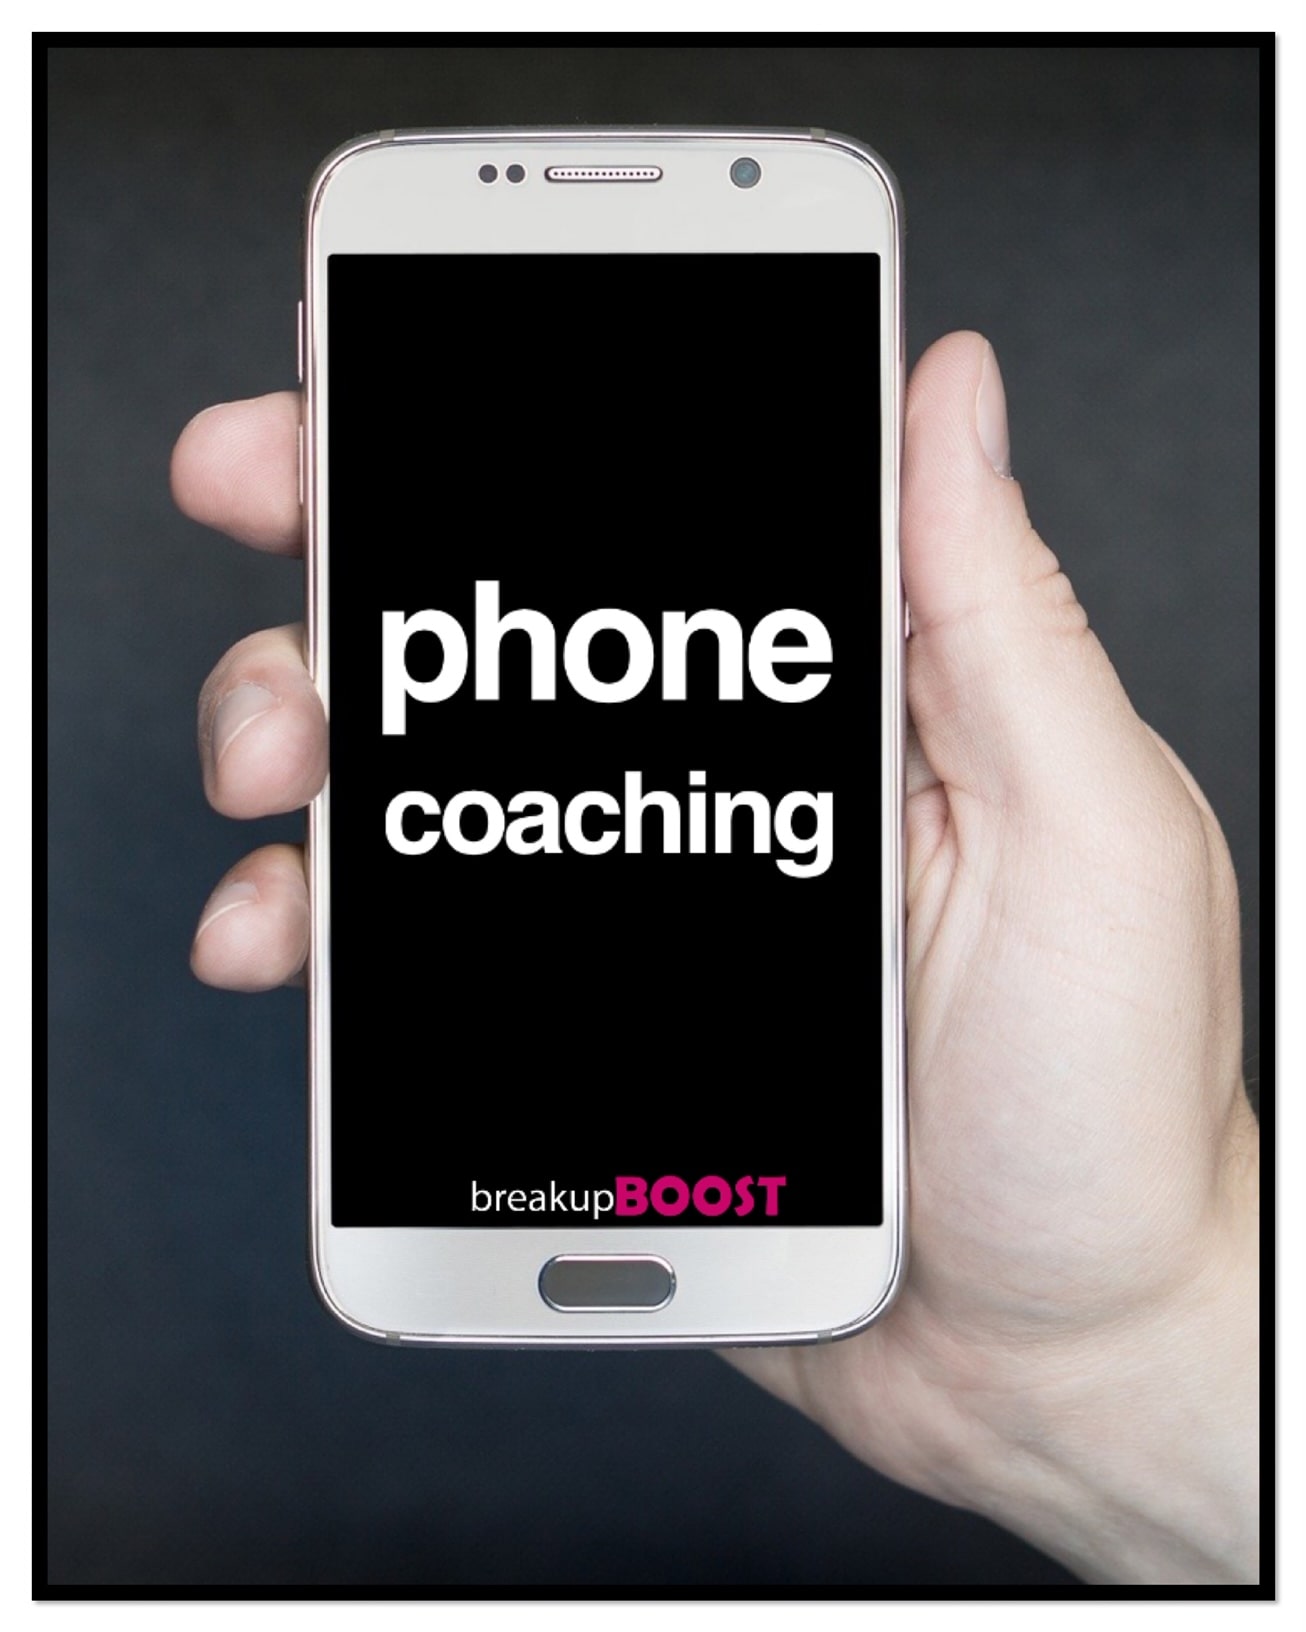 phone coaching with breakup boost